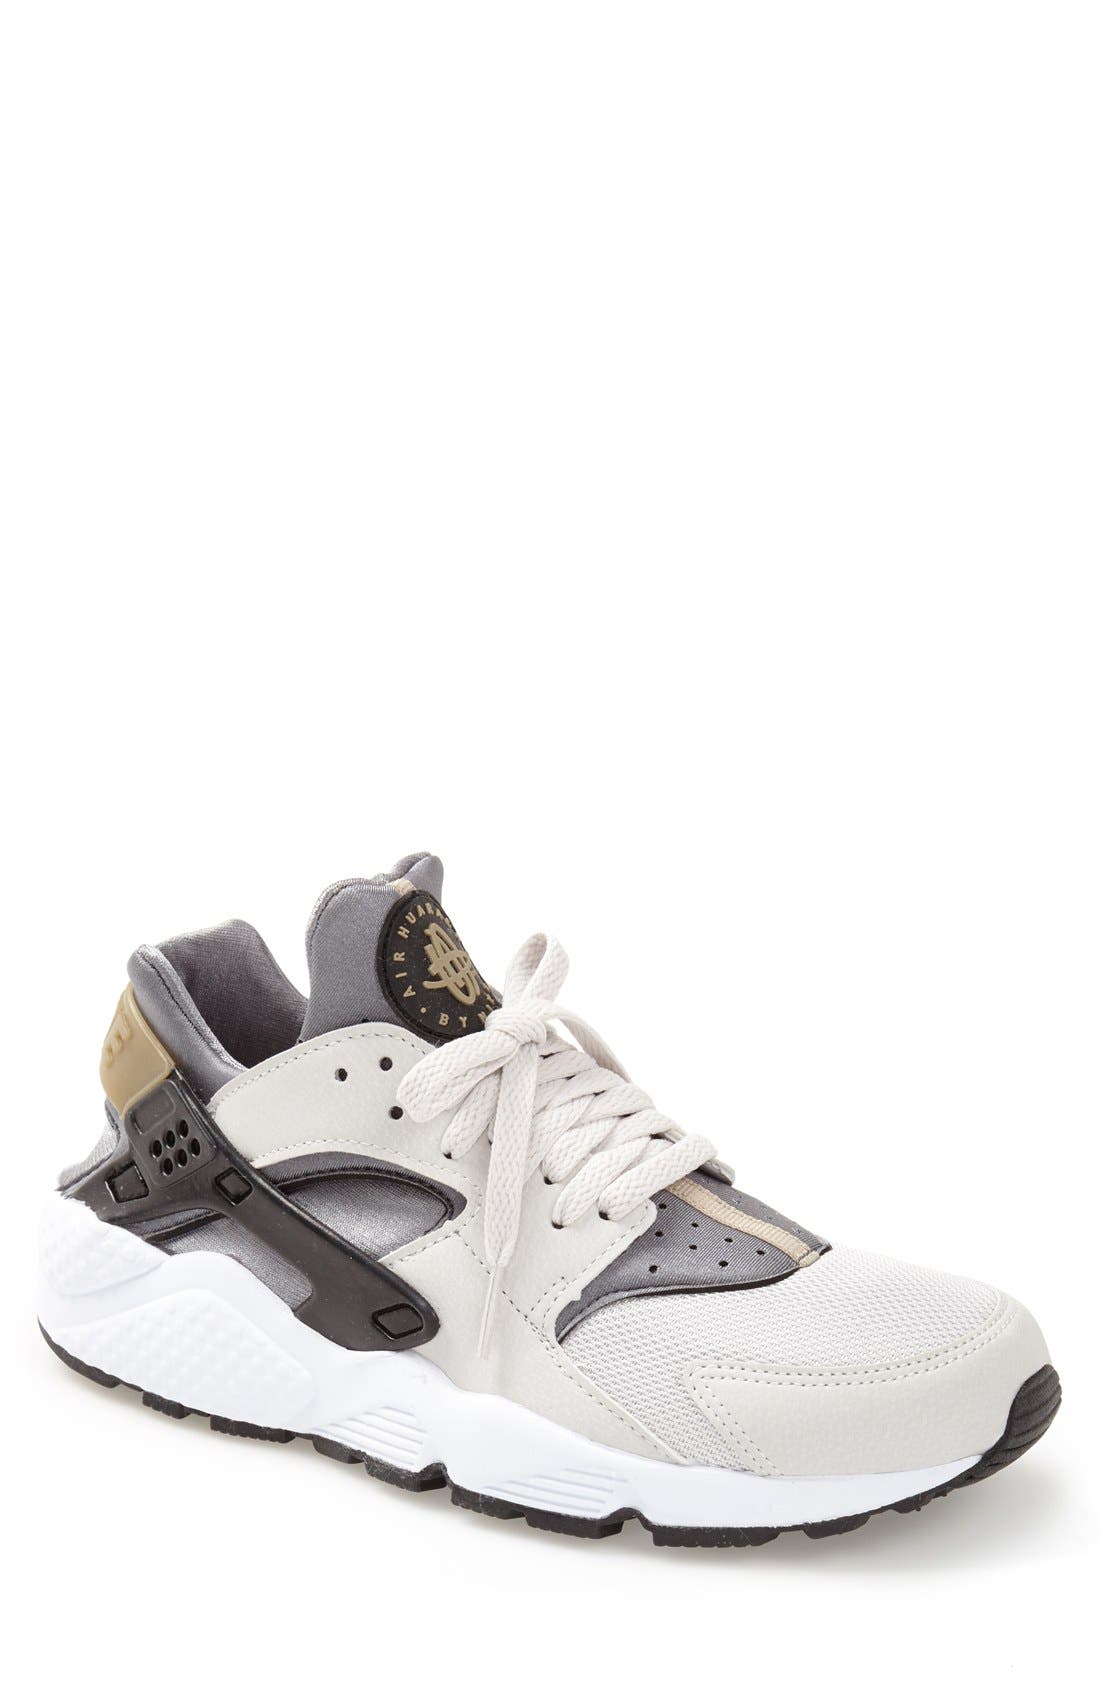 huaraches nordstrom